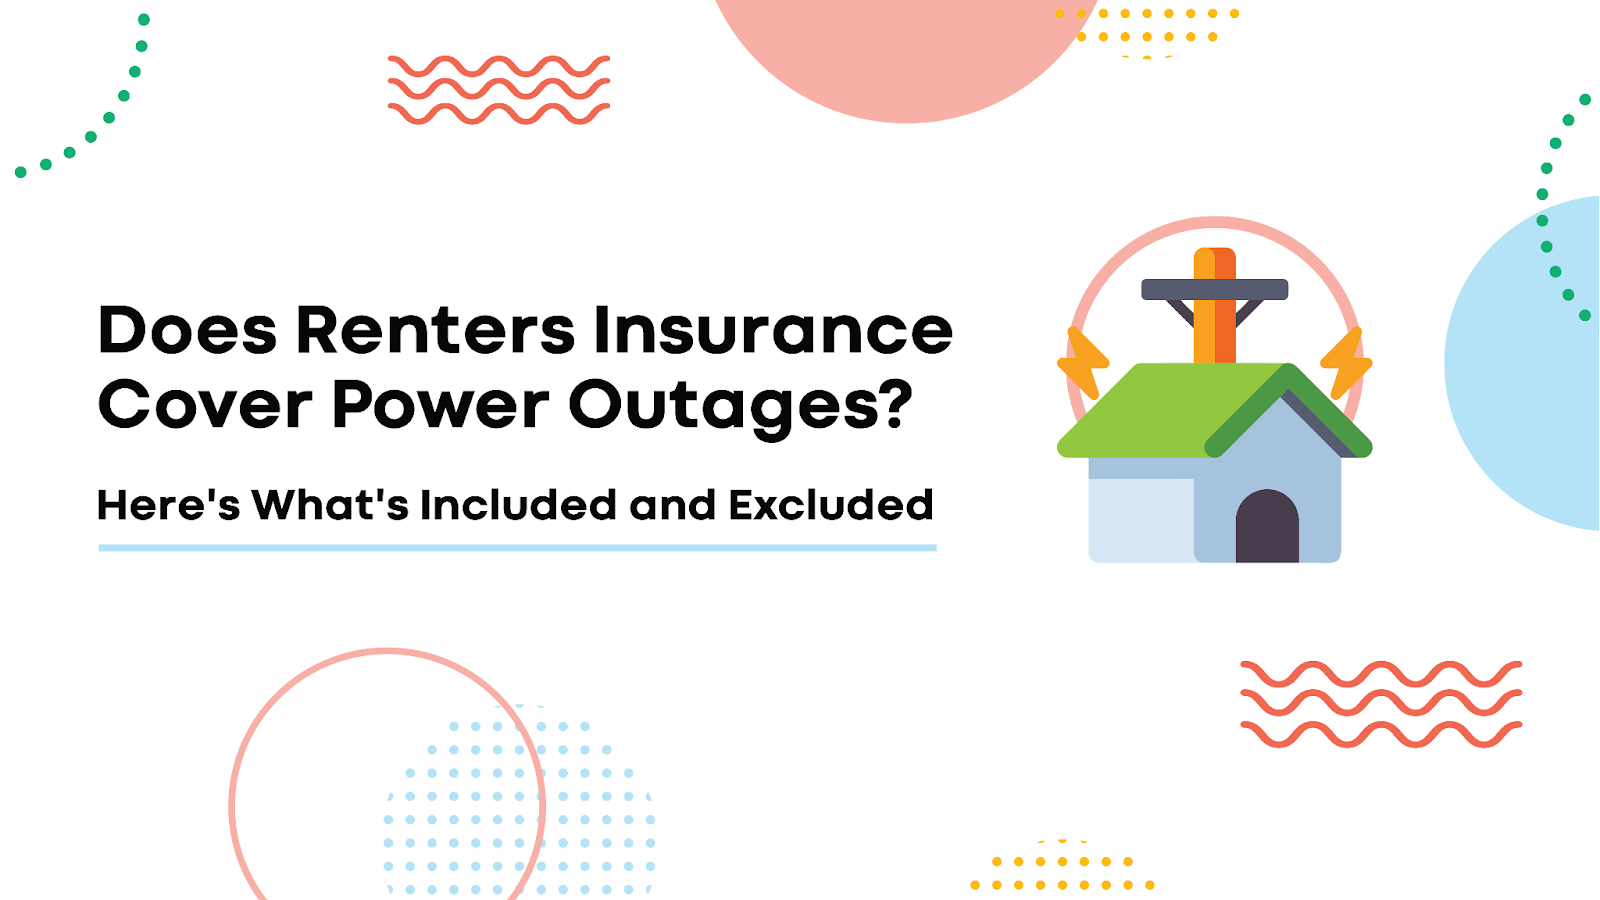 Does Renters Insurance Cover Power Outages? Here’s What’s Included and Excluded